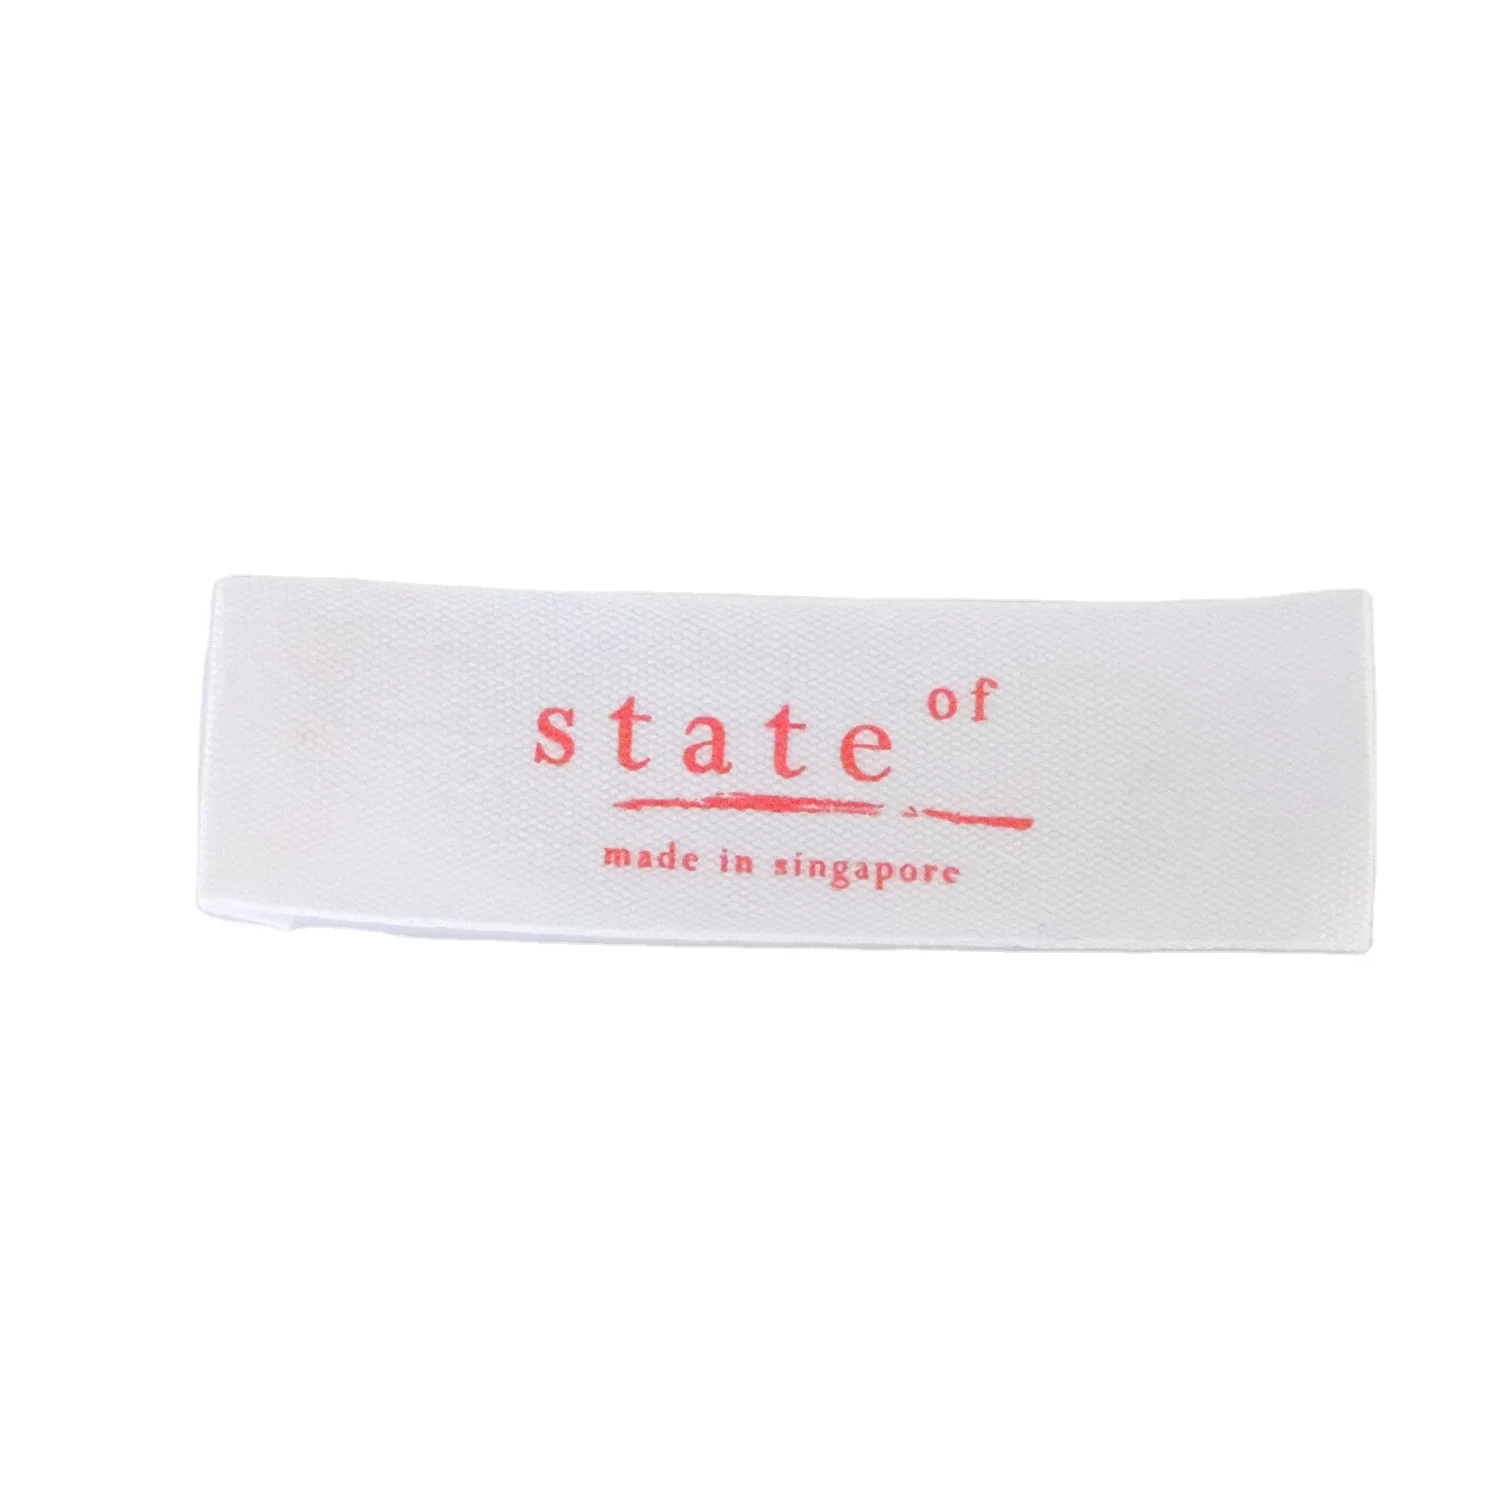 
Wholesale Custom Cotton Polyester Woven clothing Labels 